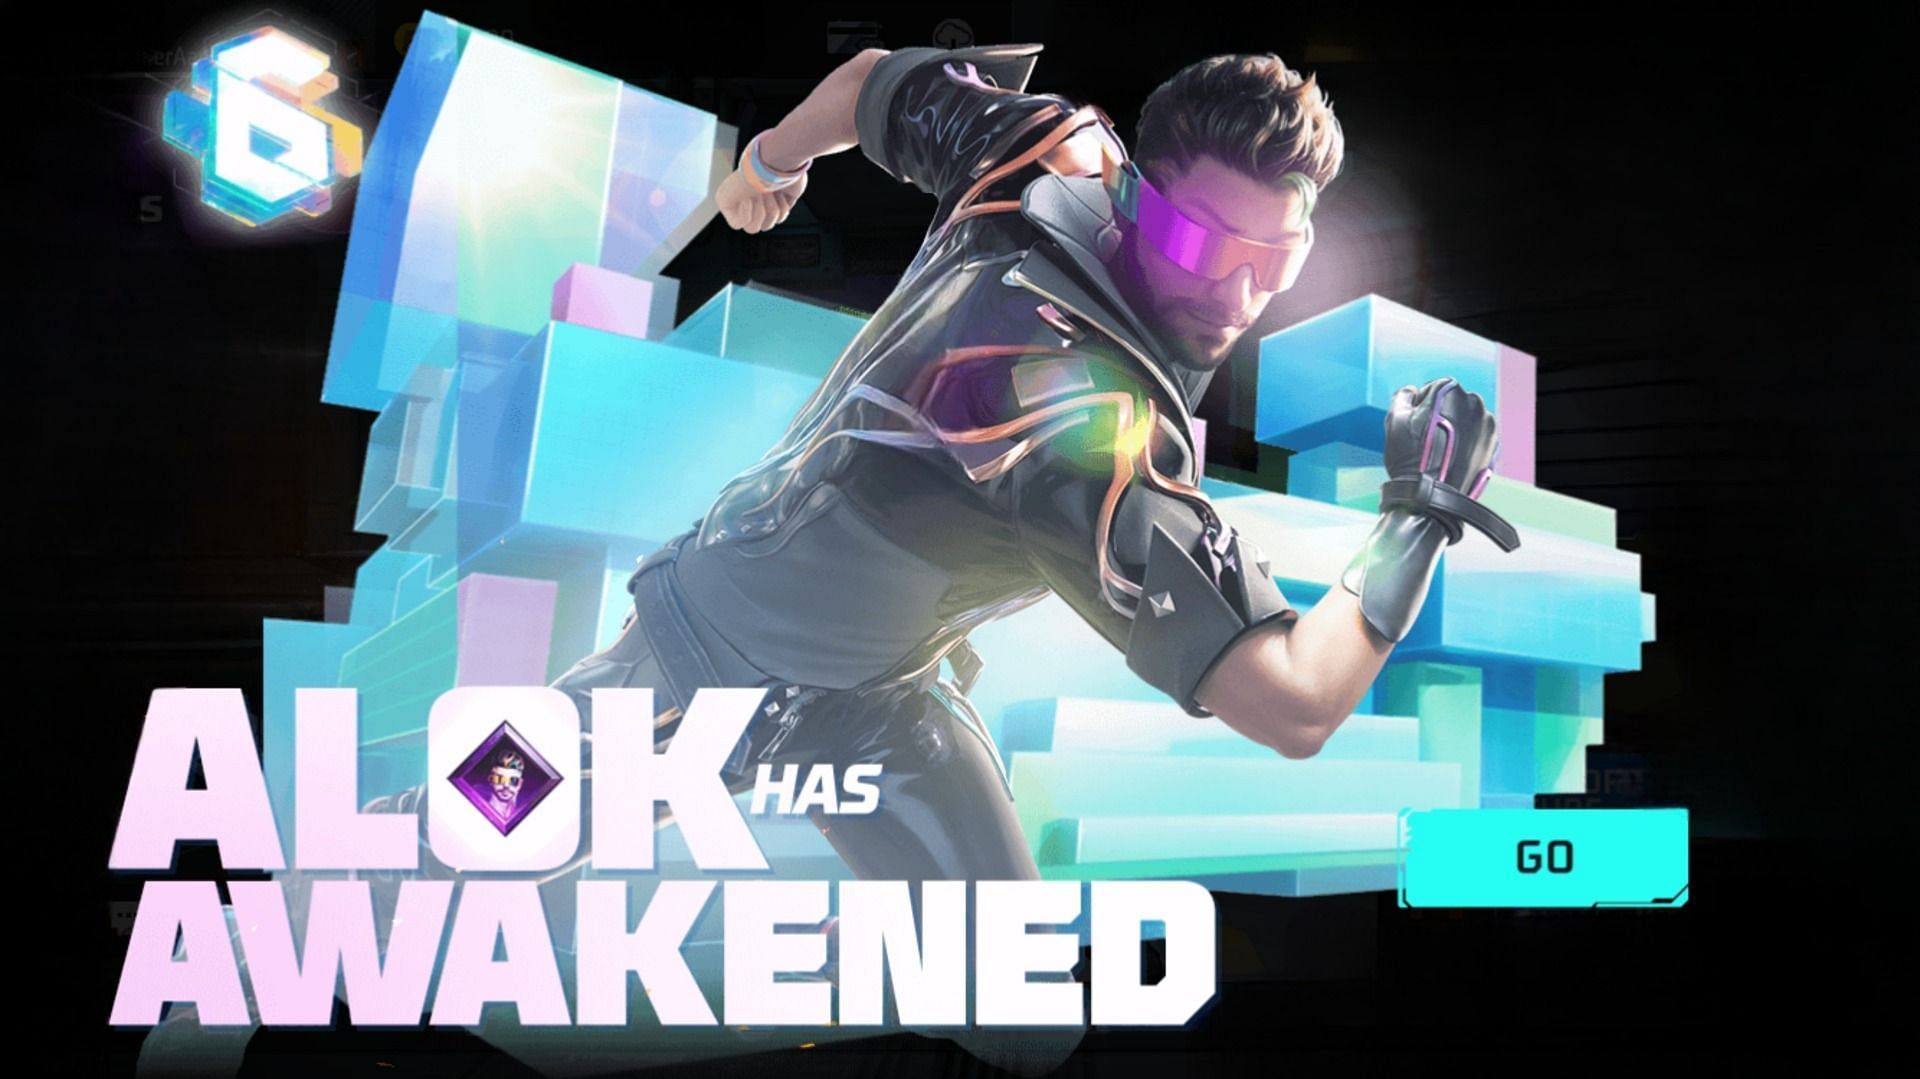 Awakened Alok has become available in Free Fire MAX (Image via Garena)